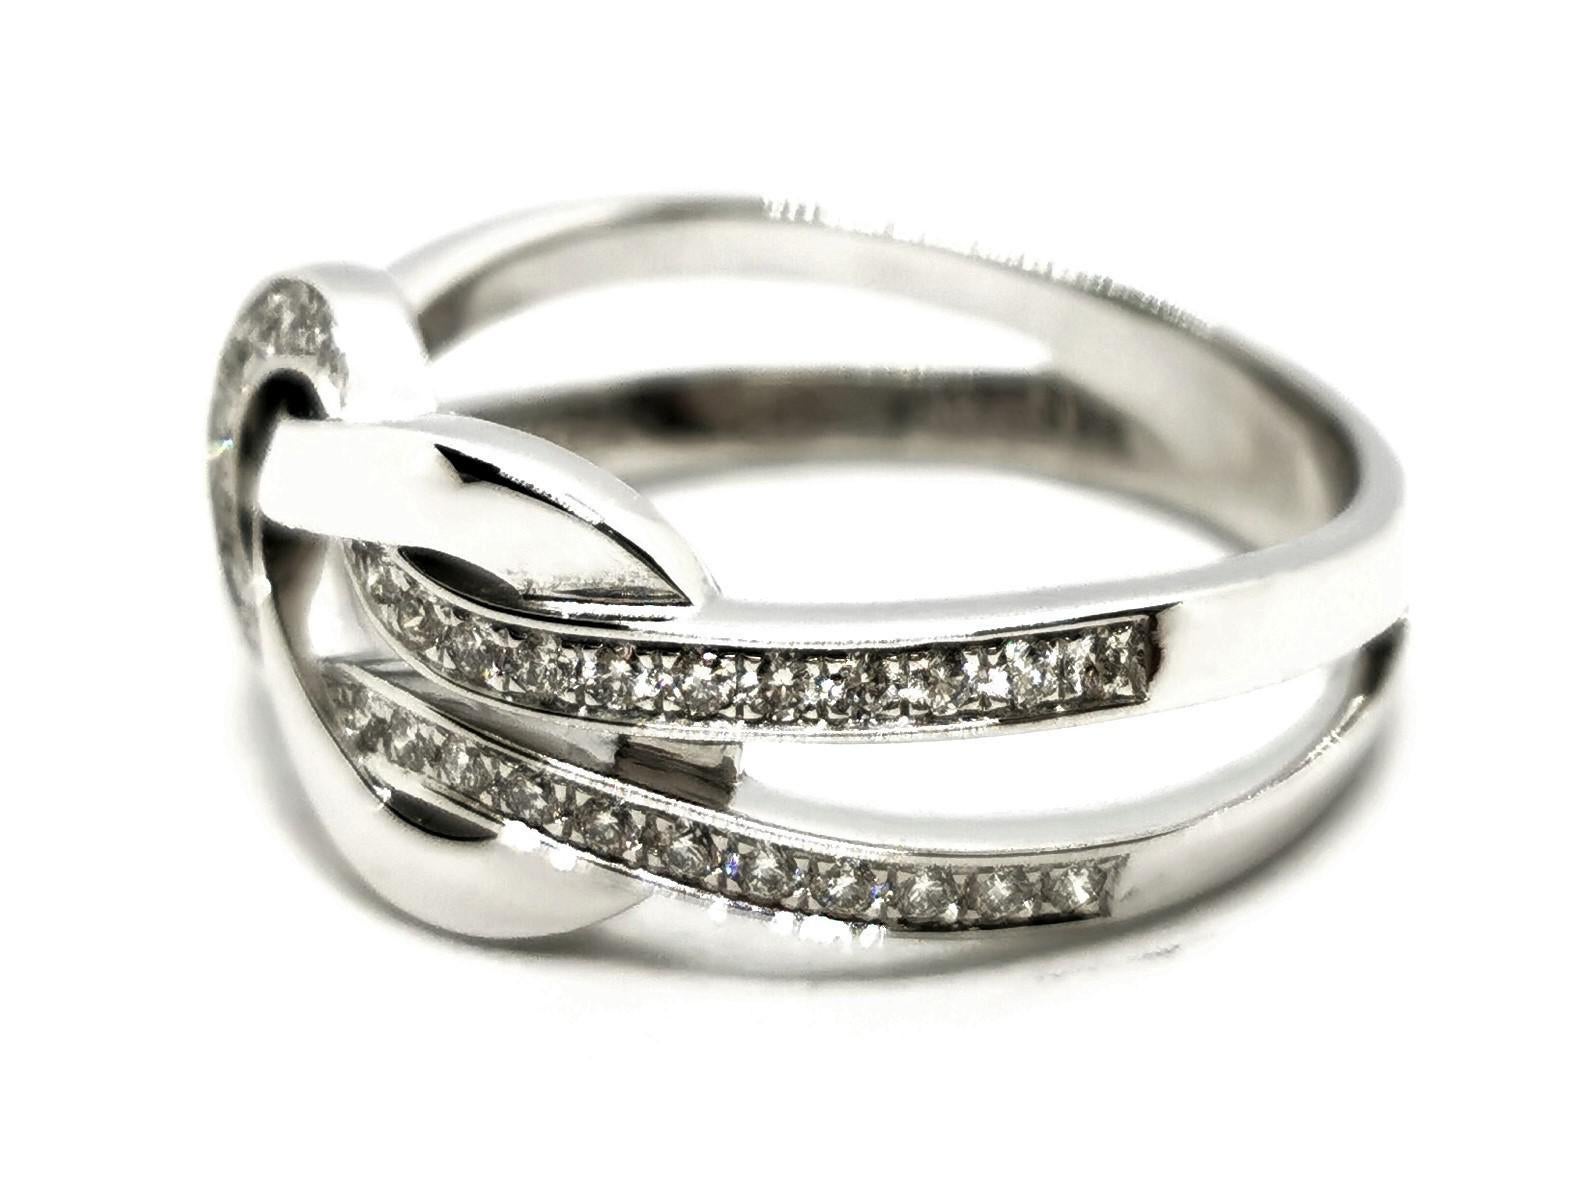 Brilliant Cut Fred Ring Chance Infinie White Gold Diamond